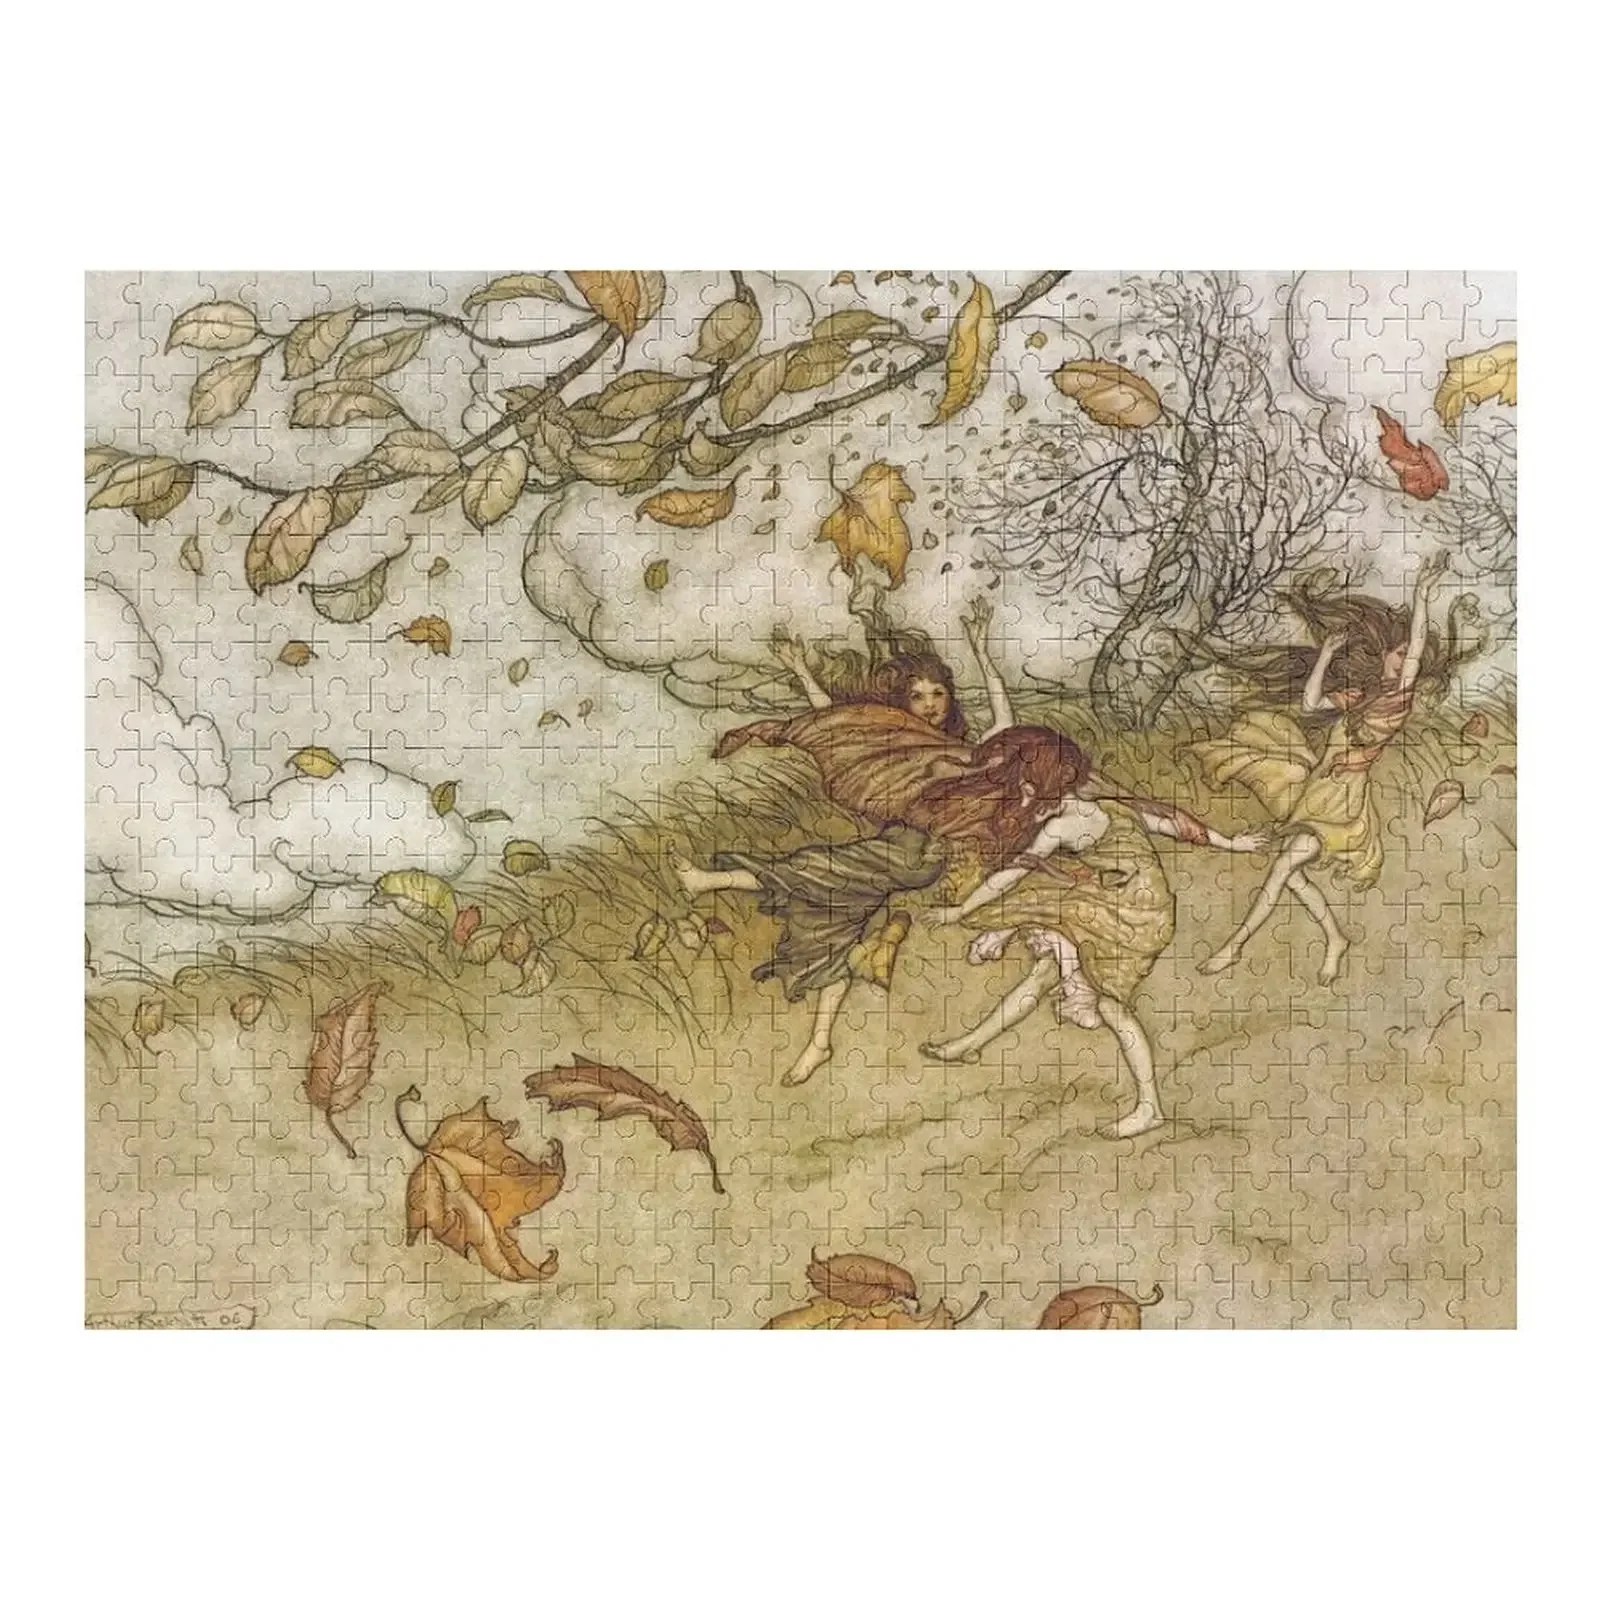 Fairies Play with Falling Leaves Arthur Rackham Jigsaw Puzzle Jigsaw Pieces Adults Game Children Puzzle